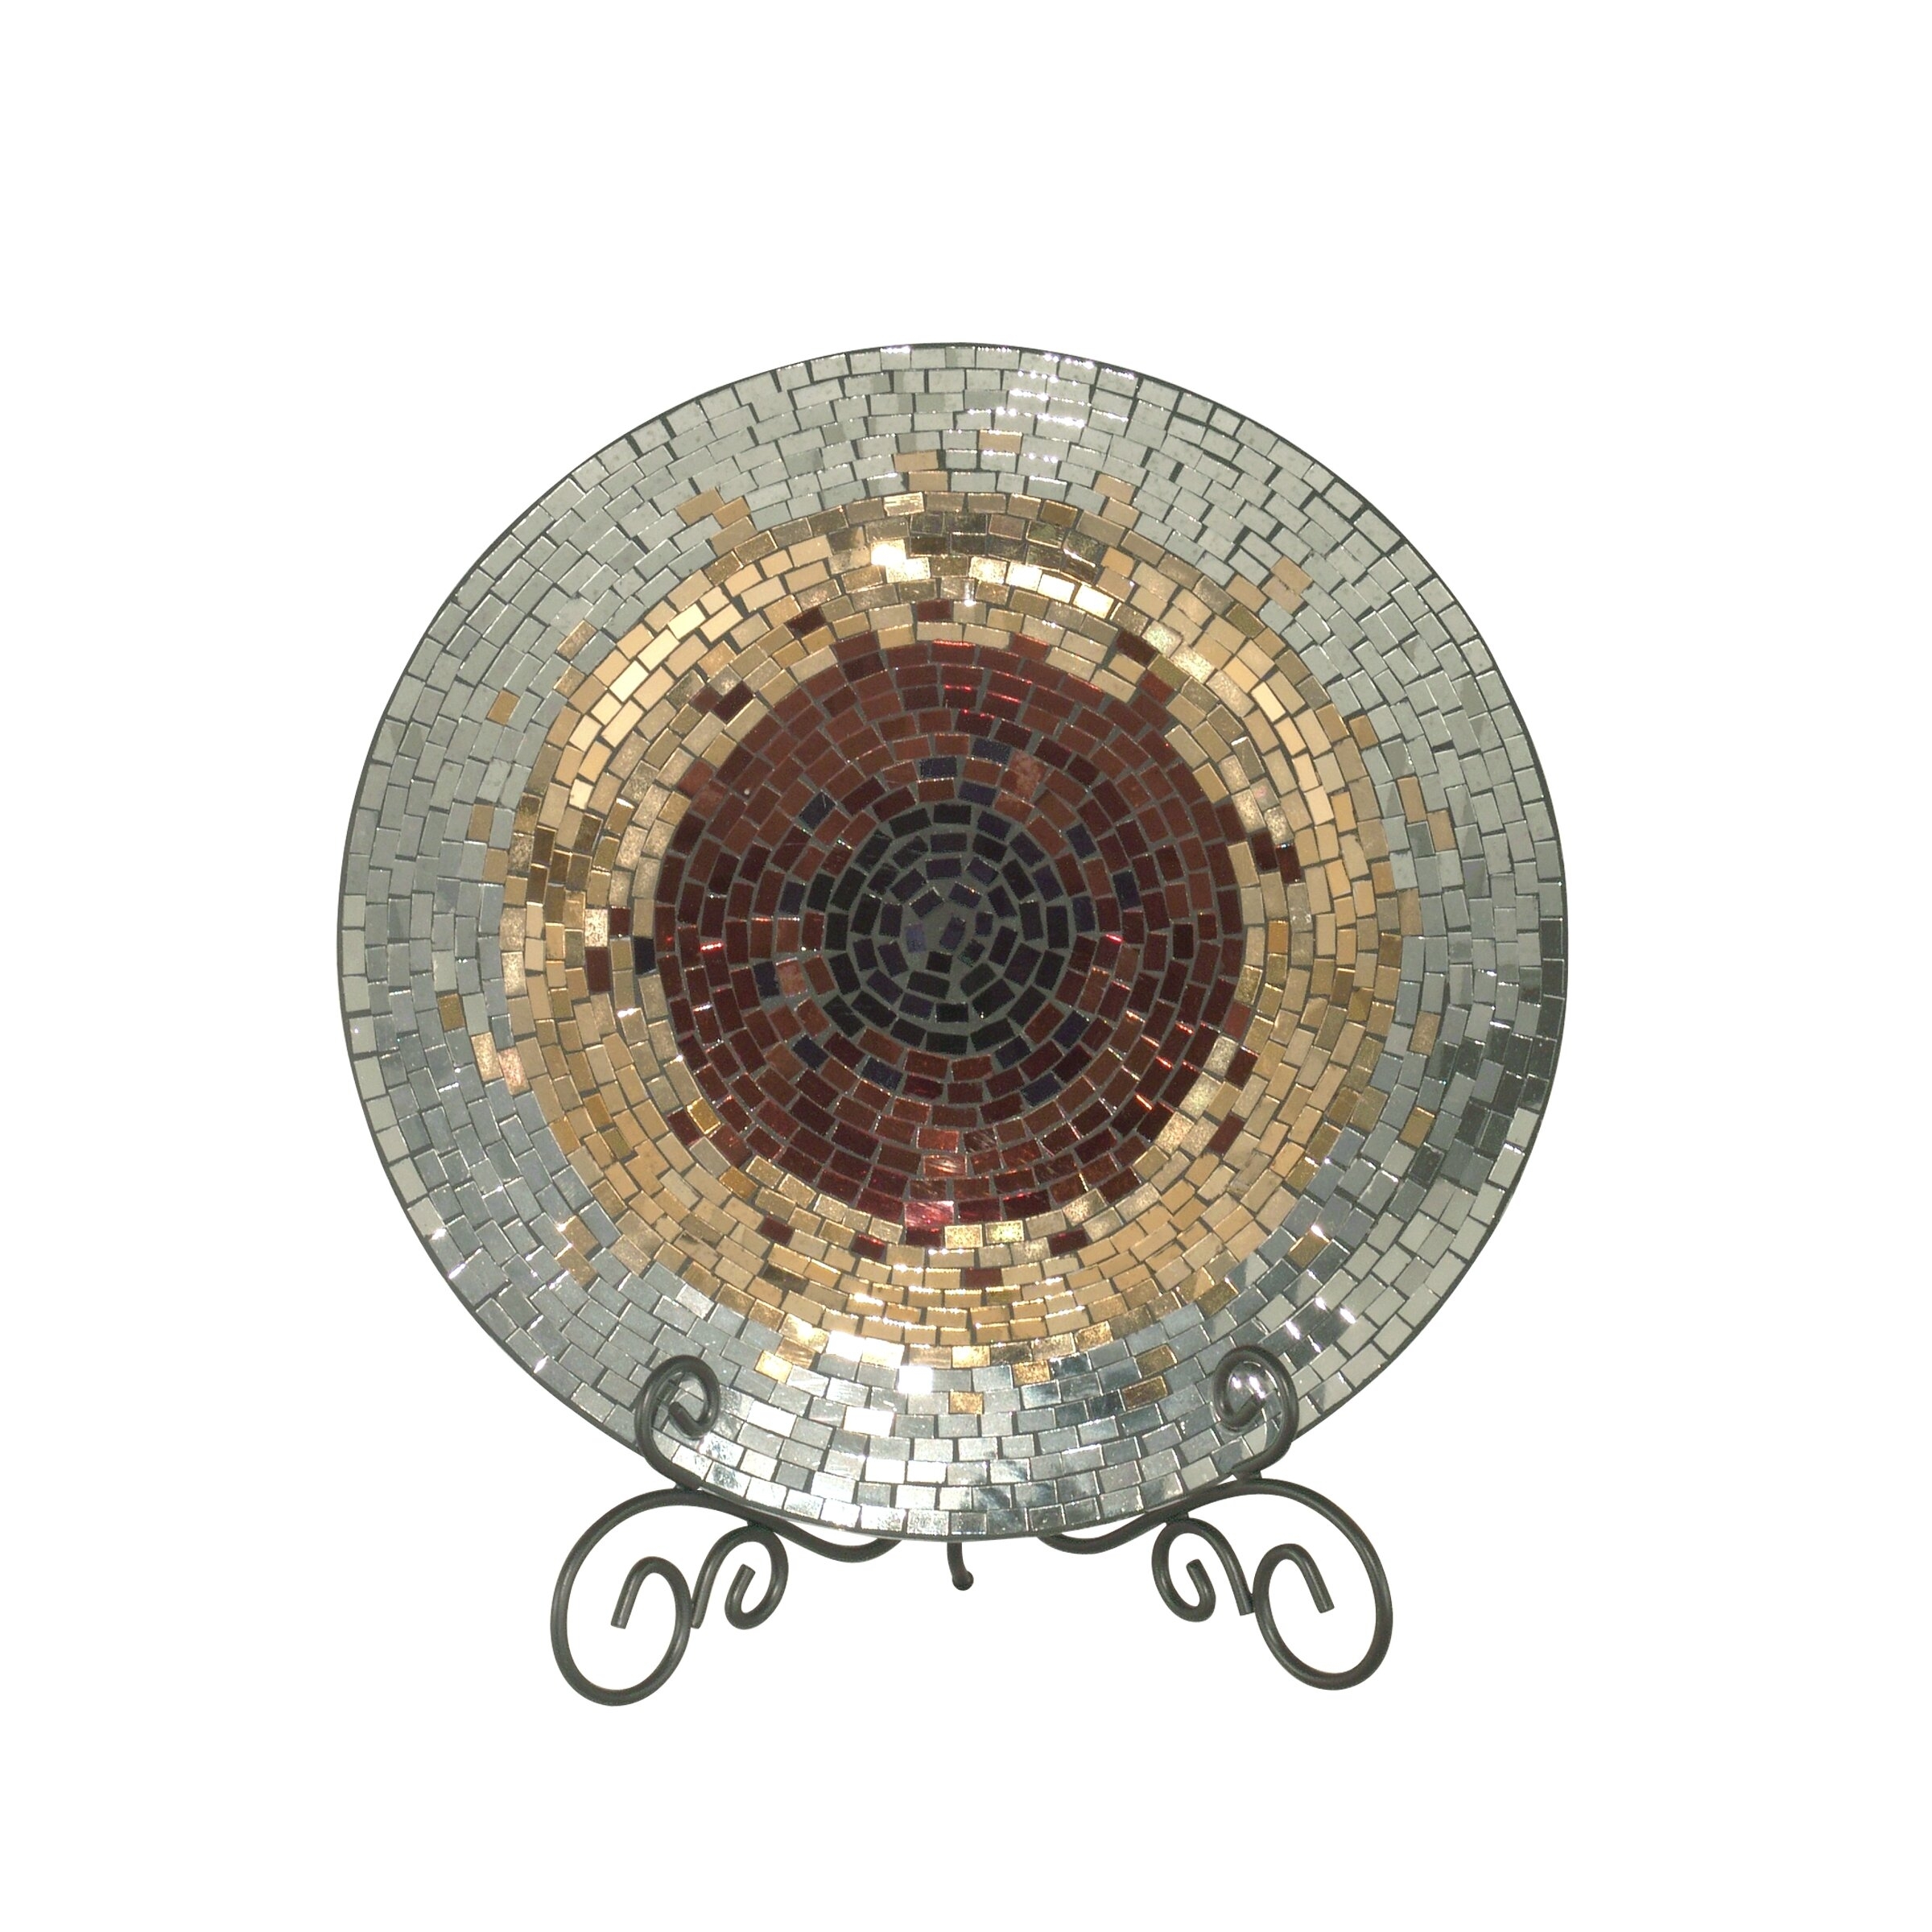 Extra Large Decorative Plates Ideas On Foter The cheapest offer starts at £4. extra large decorative plates ideas